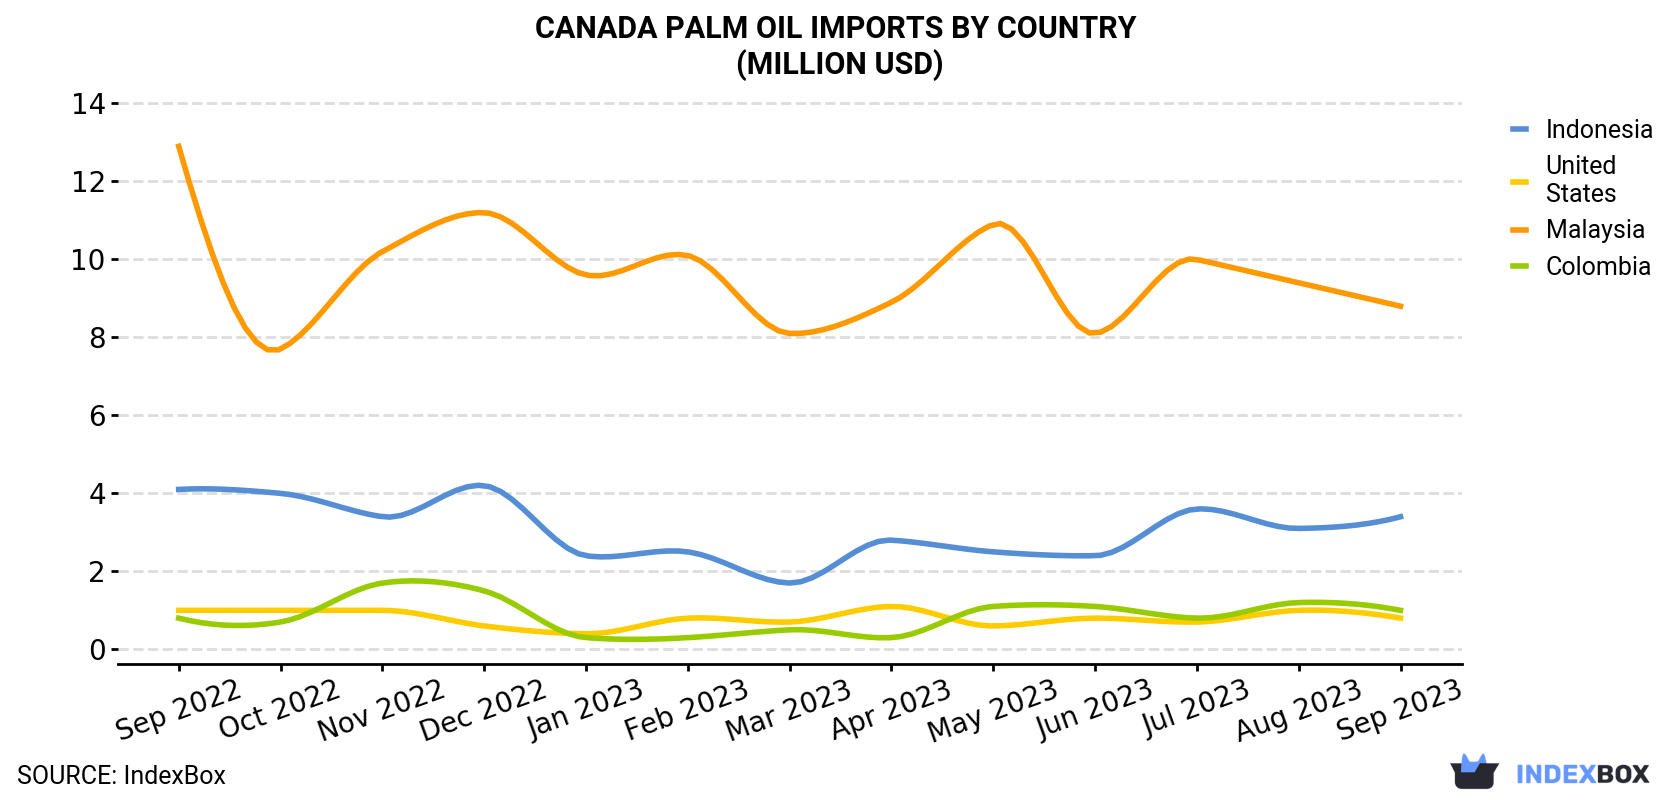 Canada Palm Oil Imports By Country (Million USD)